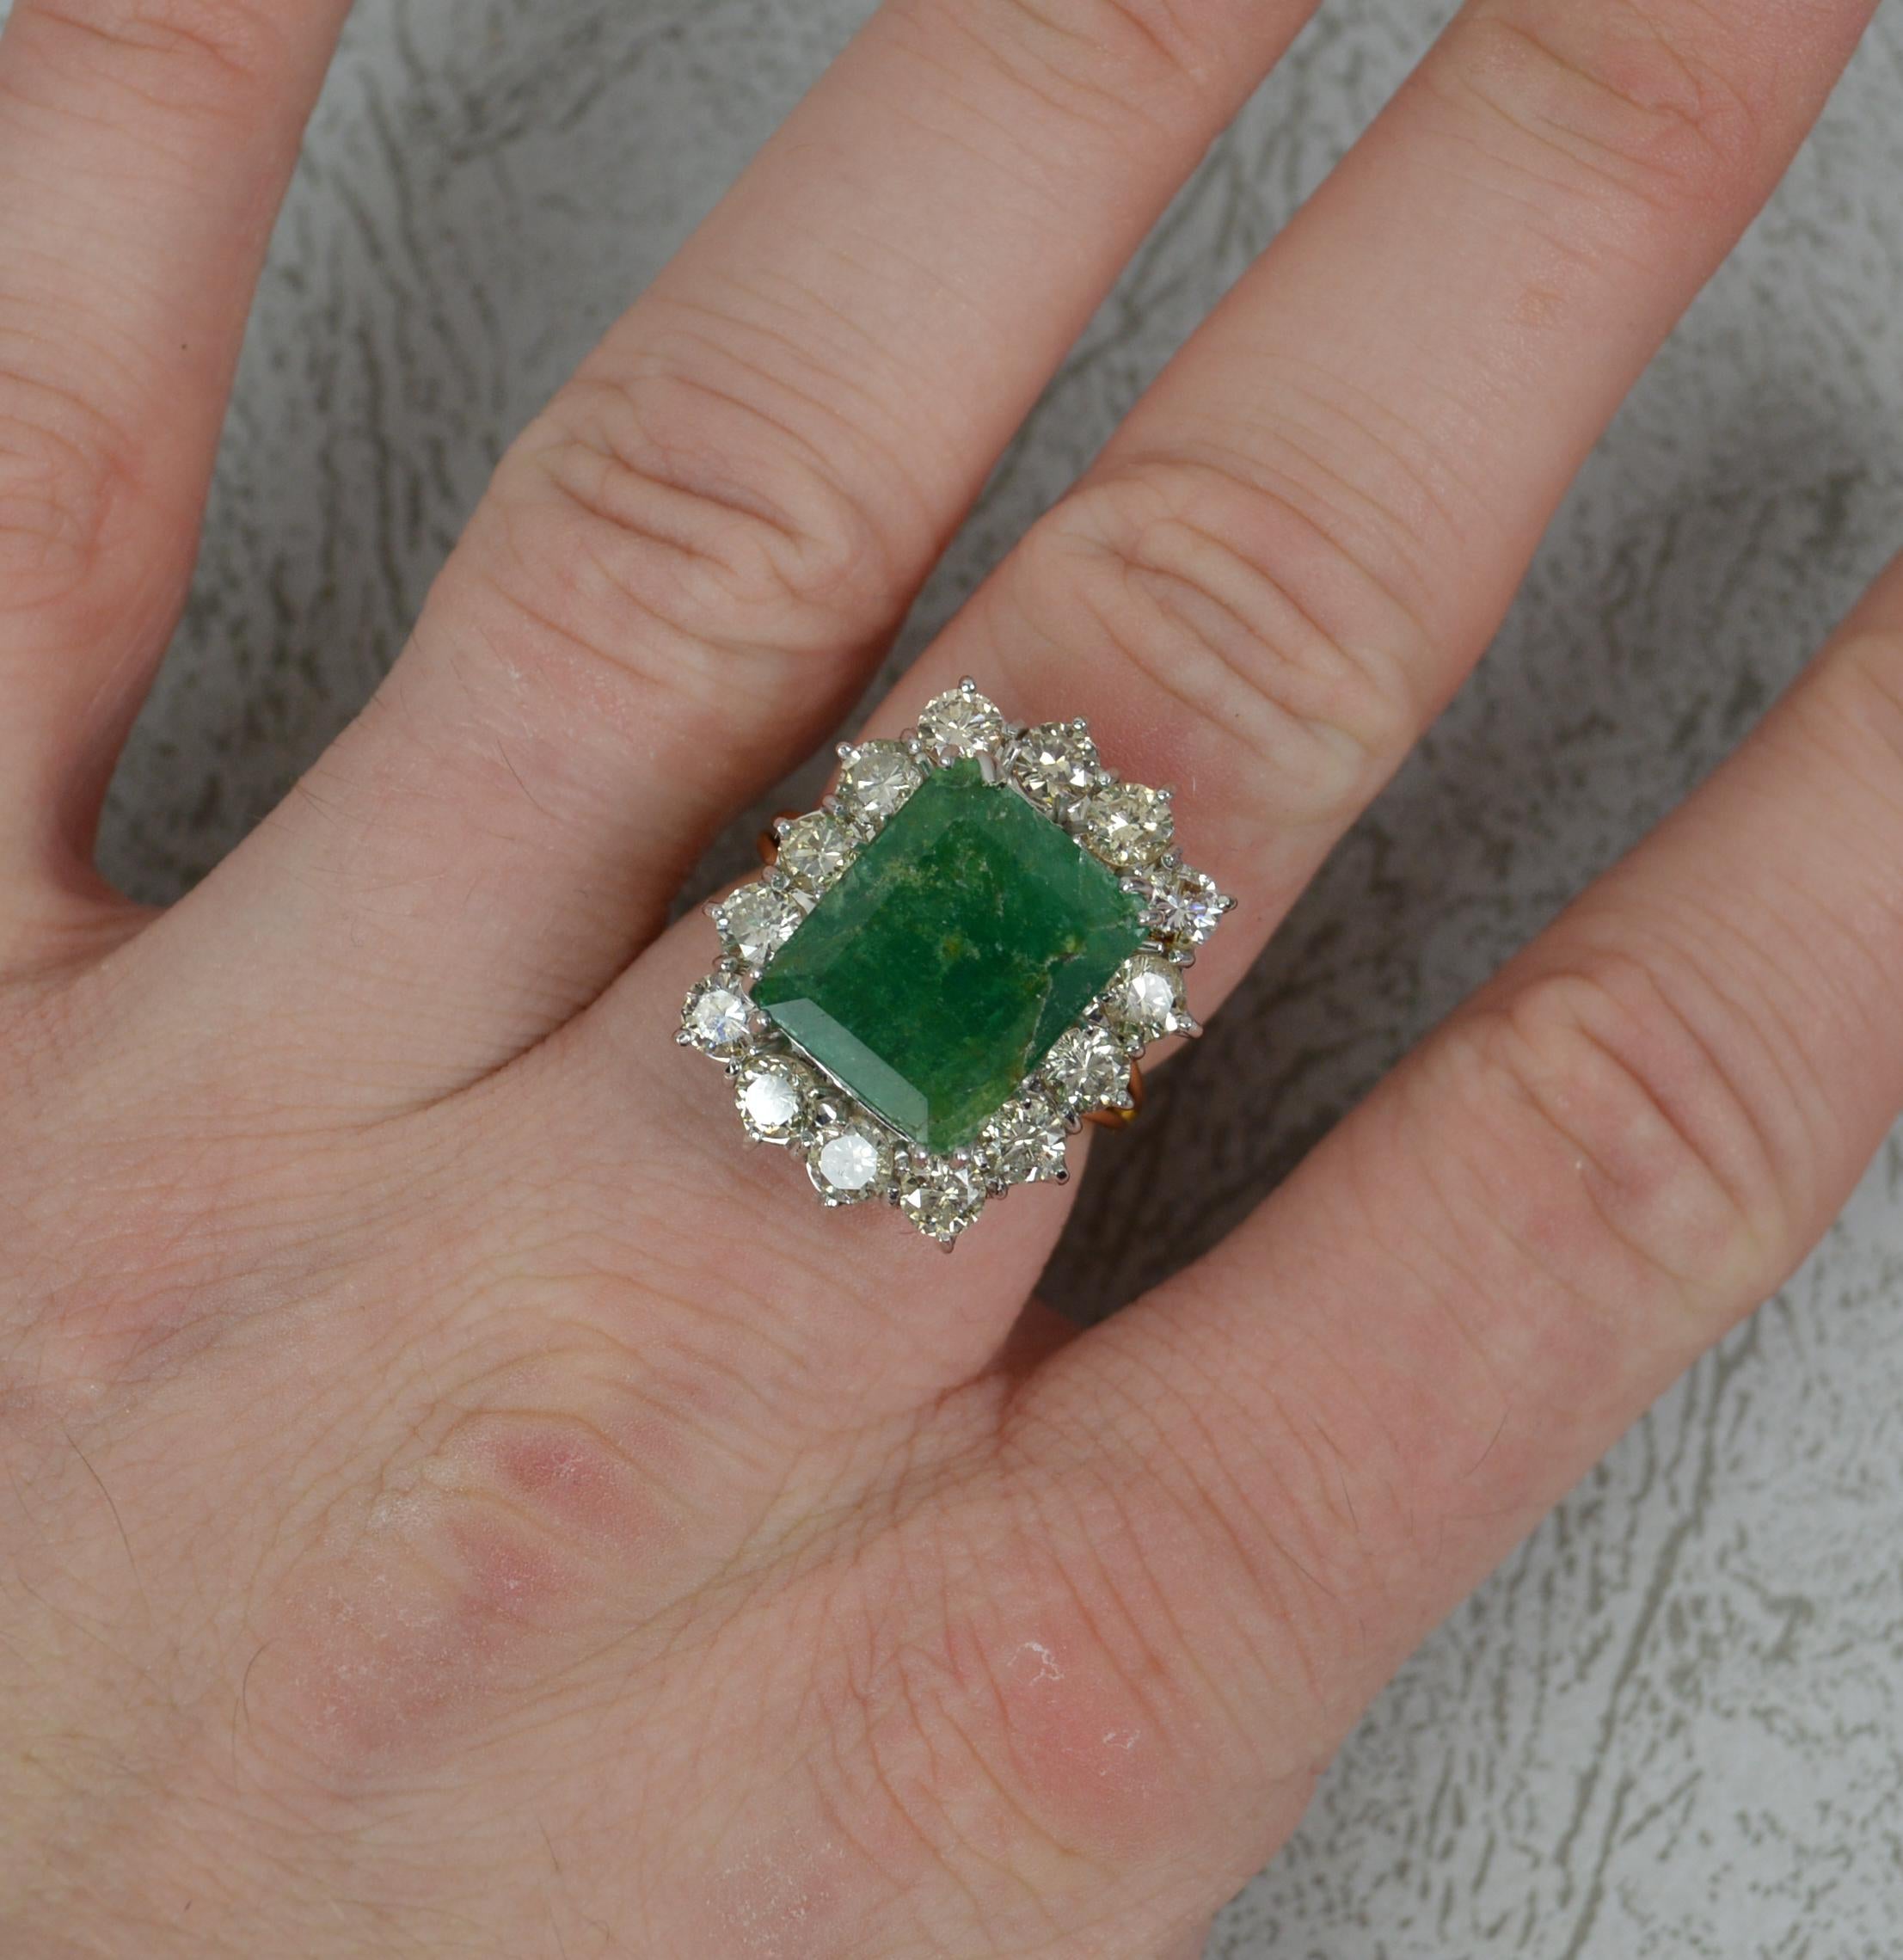 A superb Emerald and Diamond cluster ring.
Modelled in an 18ct yellow gold with a white gold head setting.
Designed with a very large emerald cut natural emerald to centre. 10.5mm x 13.1mm. Surrounding are fourteen round brilliant cut diamonds, all